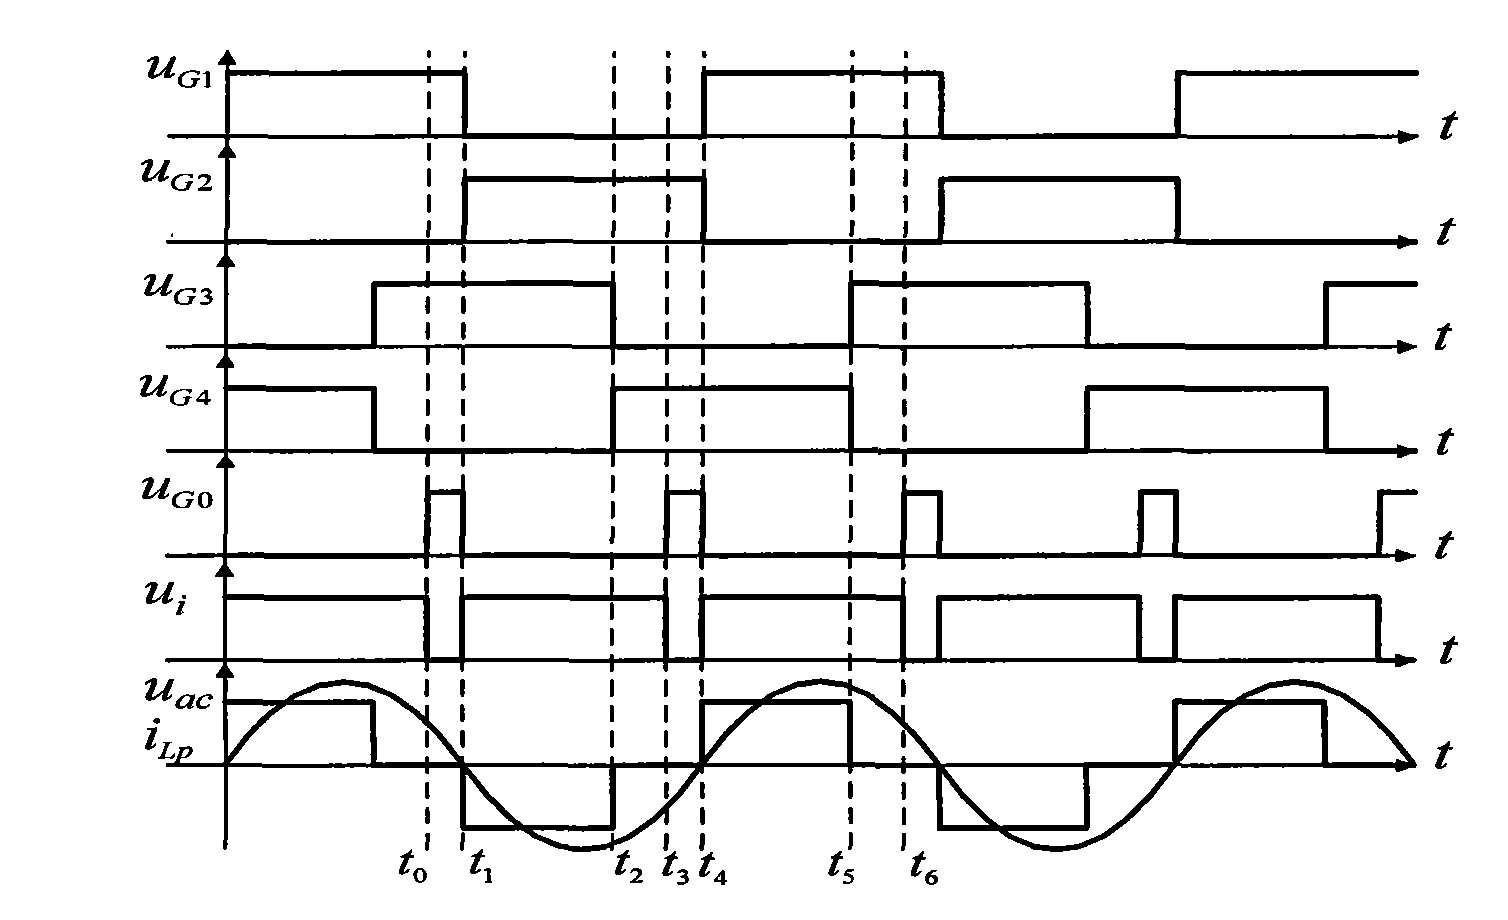 Non-contact electric energy transmission system based on Z-source inverter and phase-shifted control method of transmission system